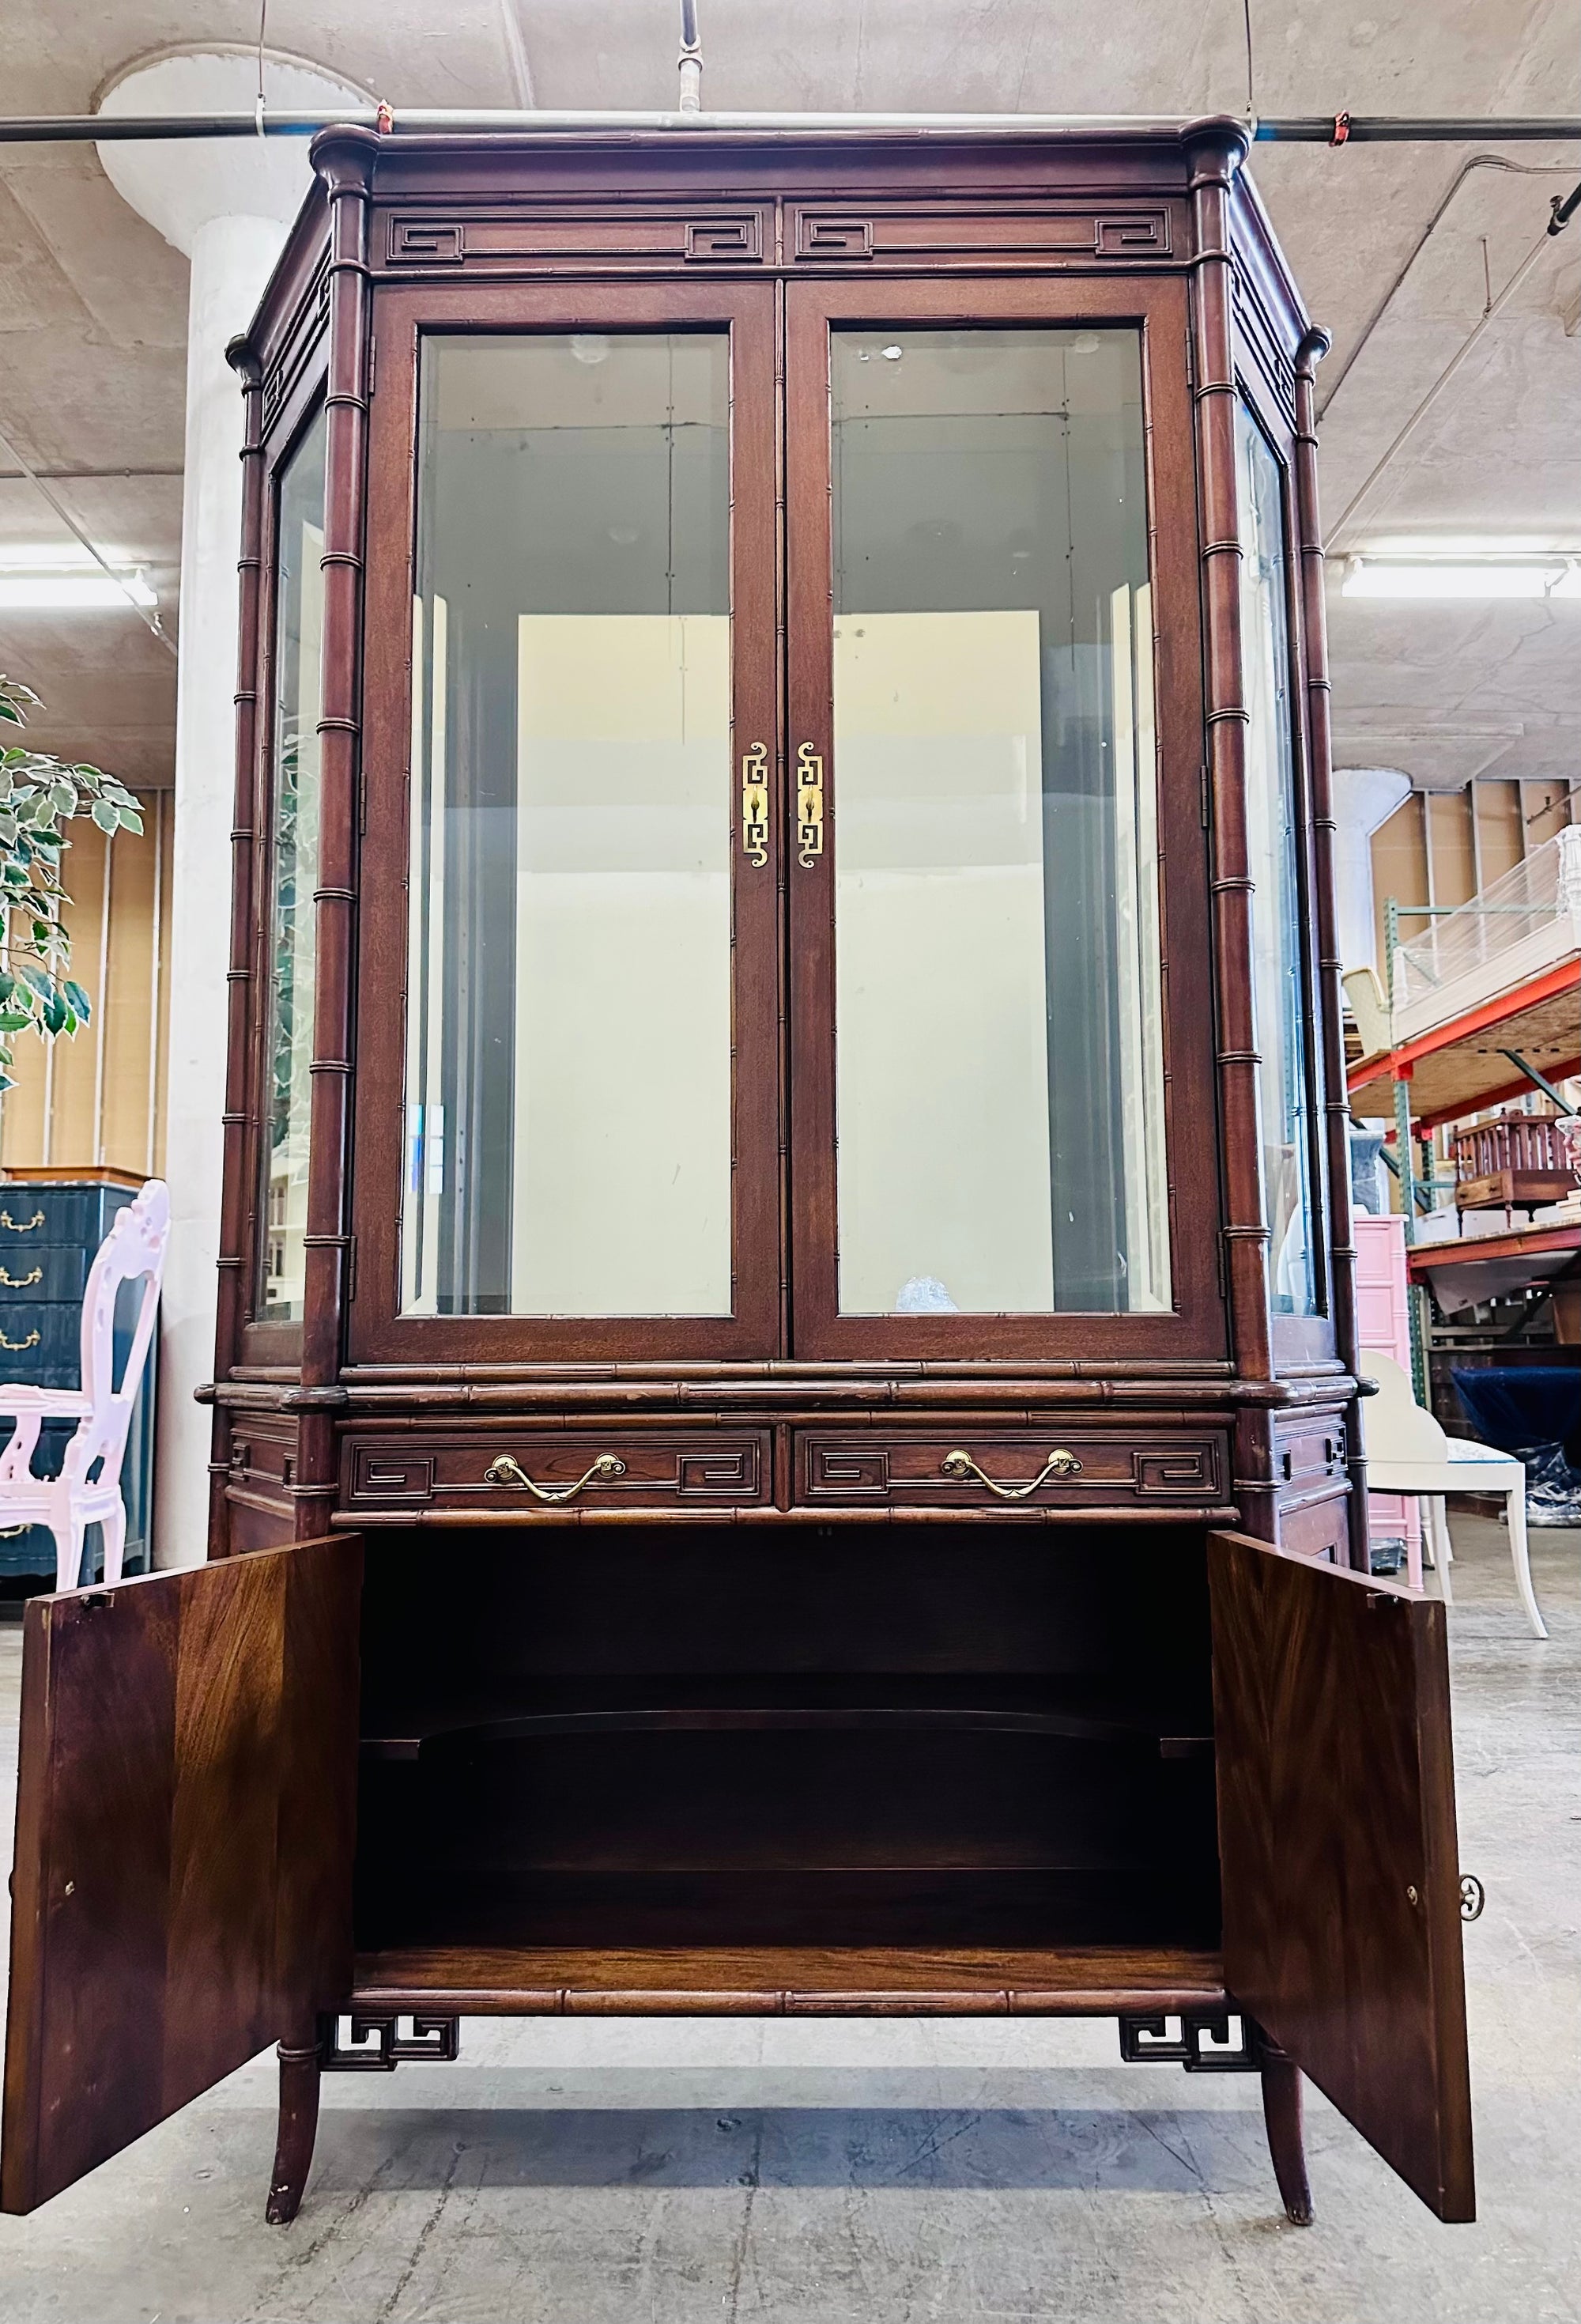 Chinoiserie China Cabinet by Century with Faux Bamboo, Greek Key, Mirror & Fretwork